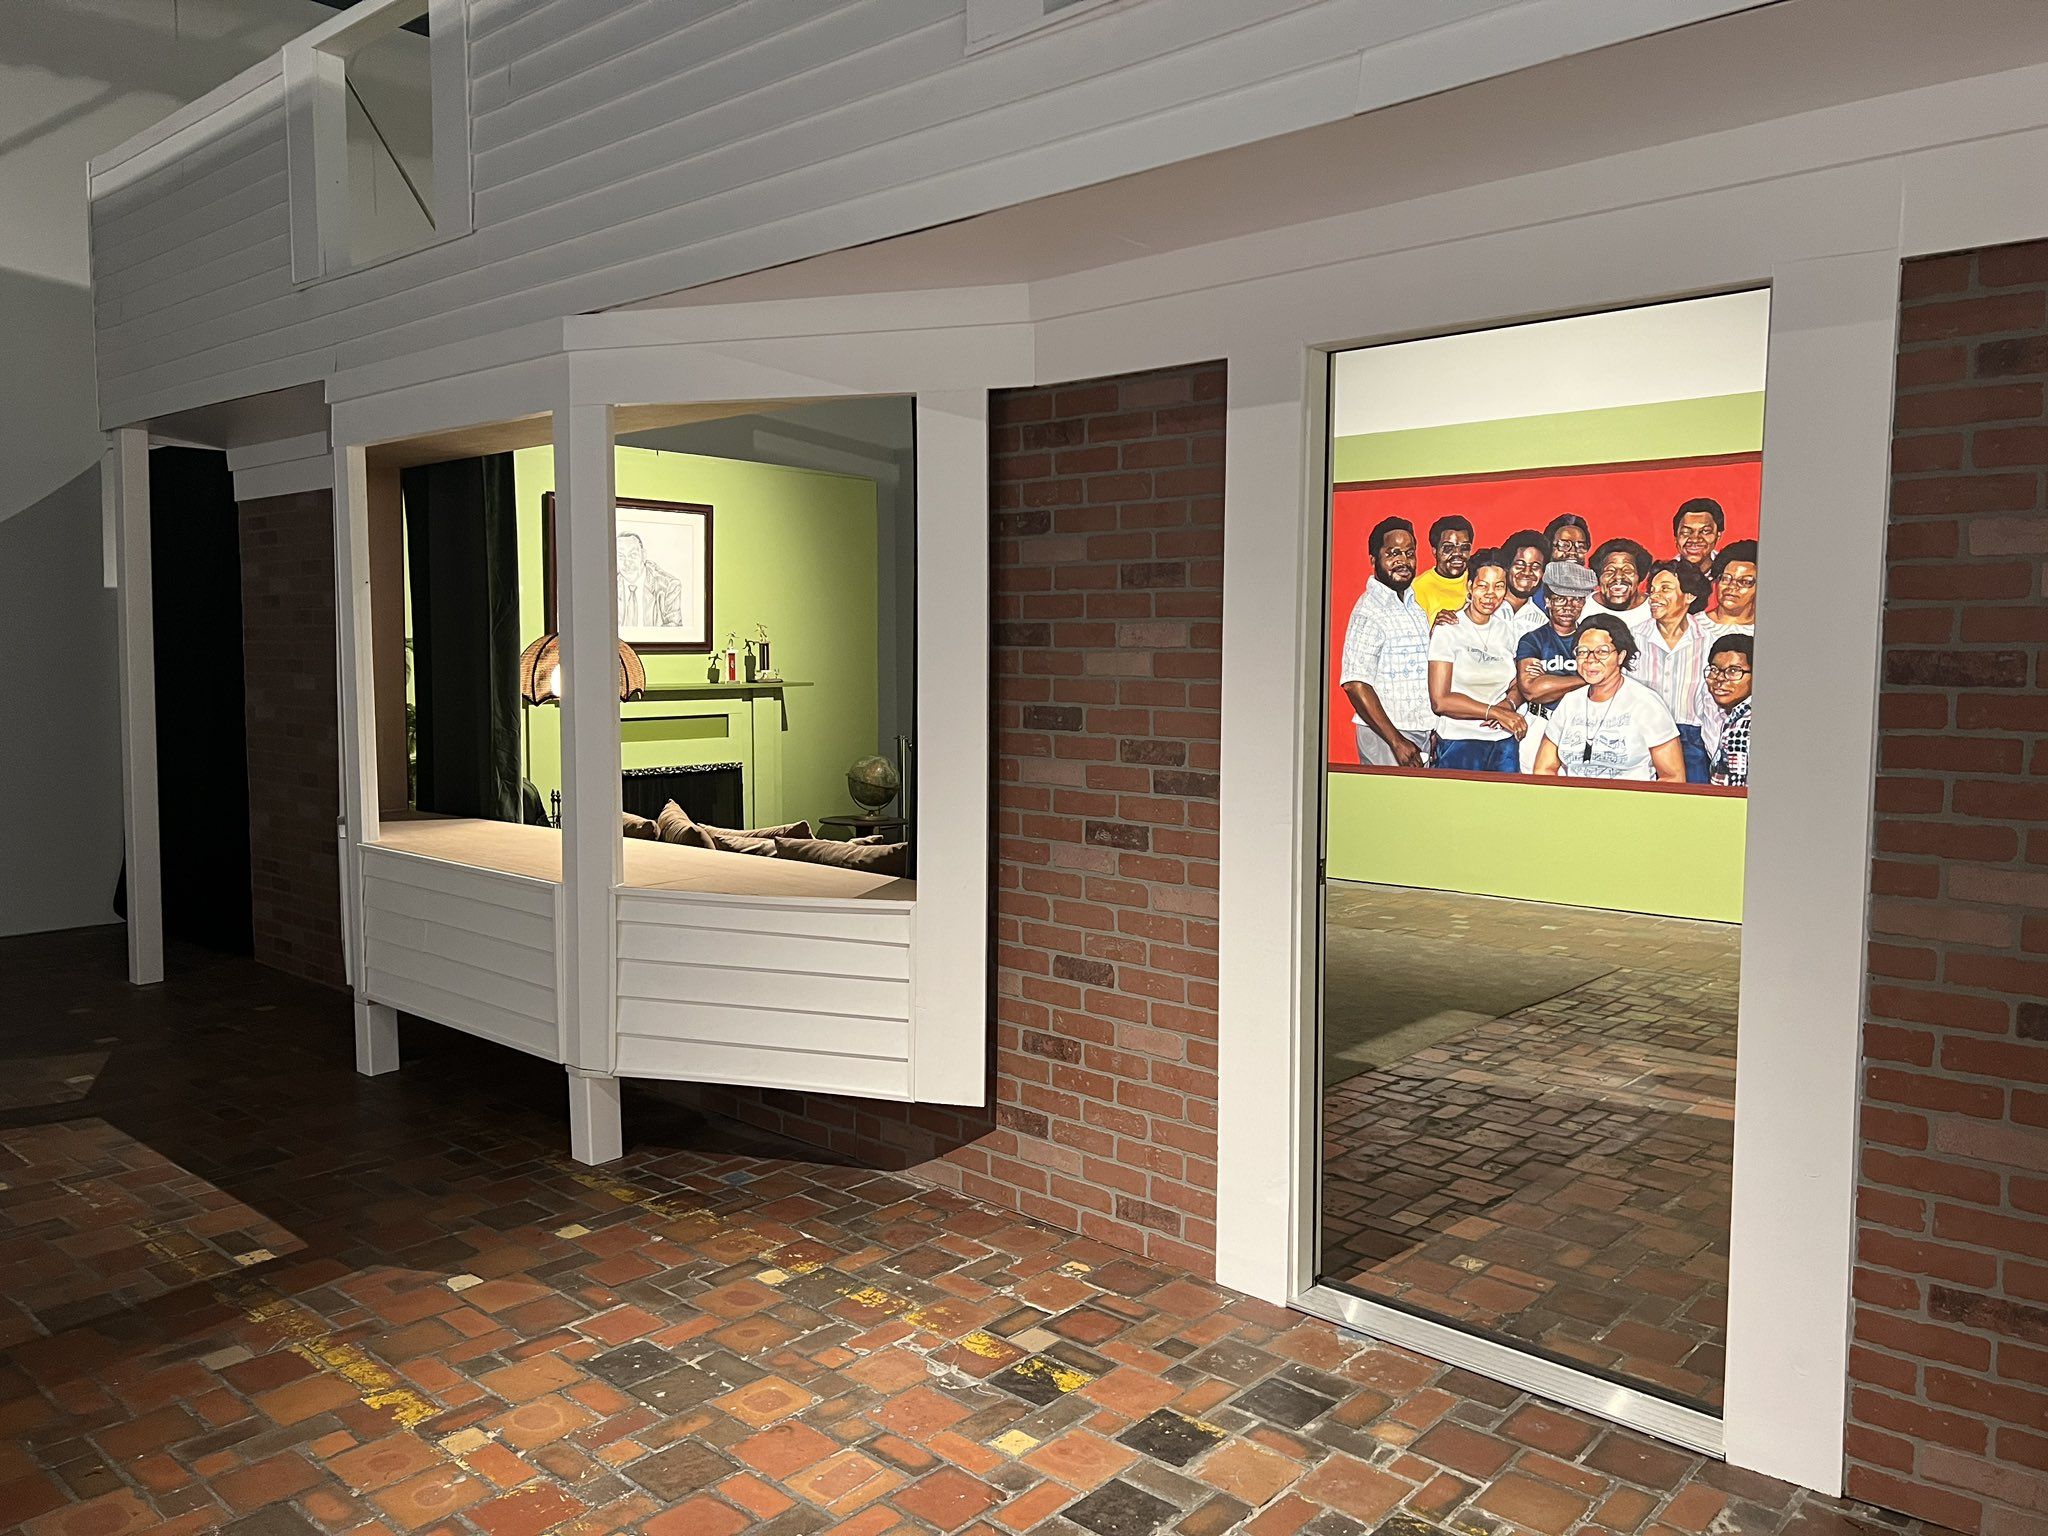 One of the installations inside the exhibition features a living room and family portrait.  